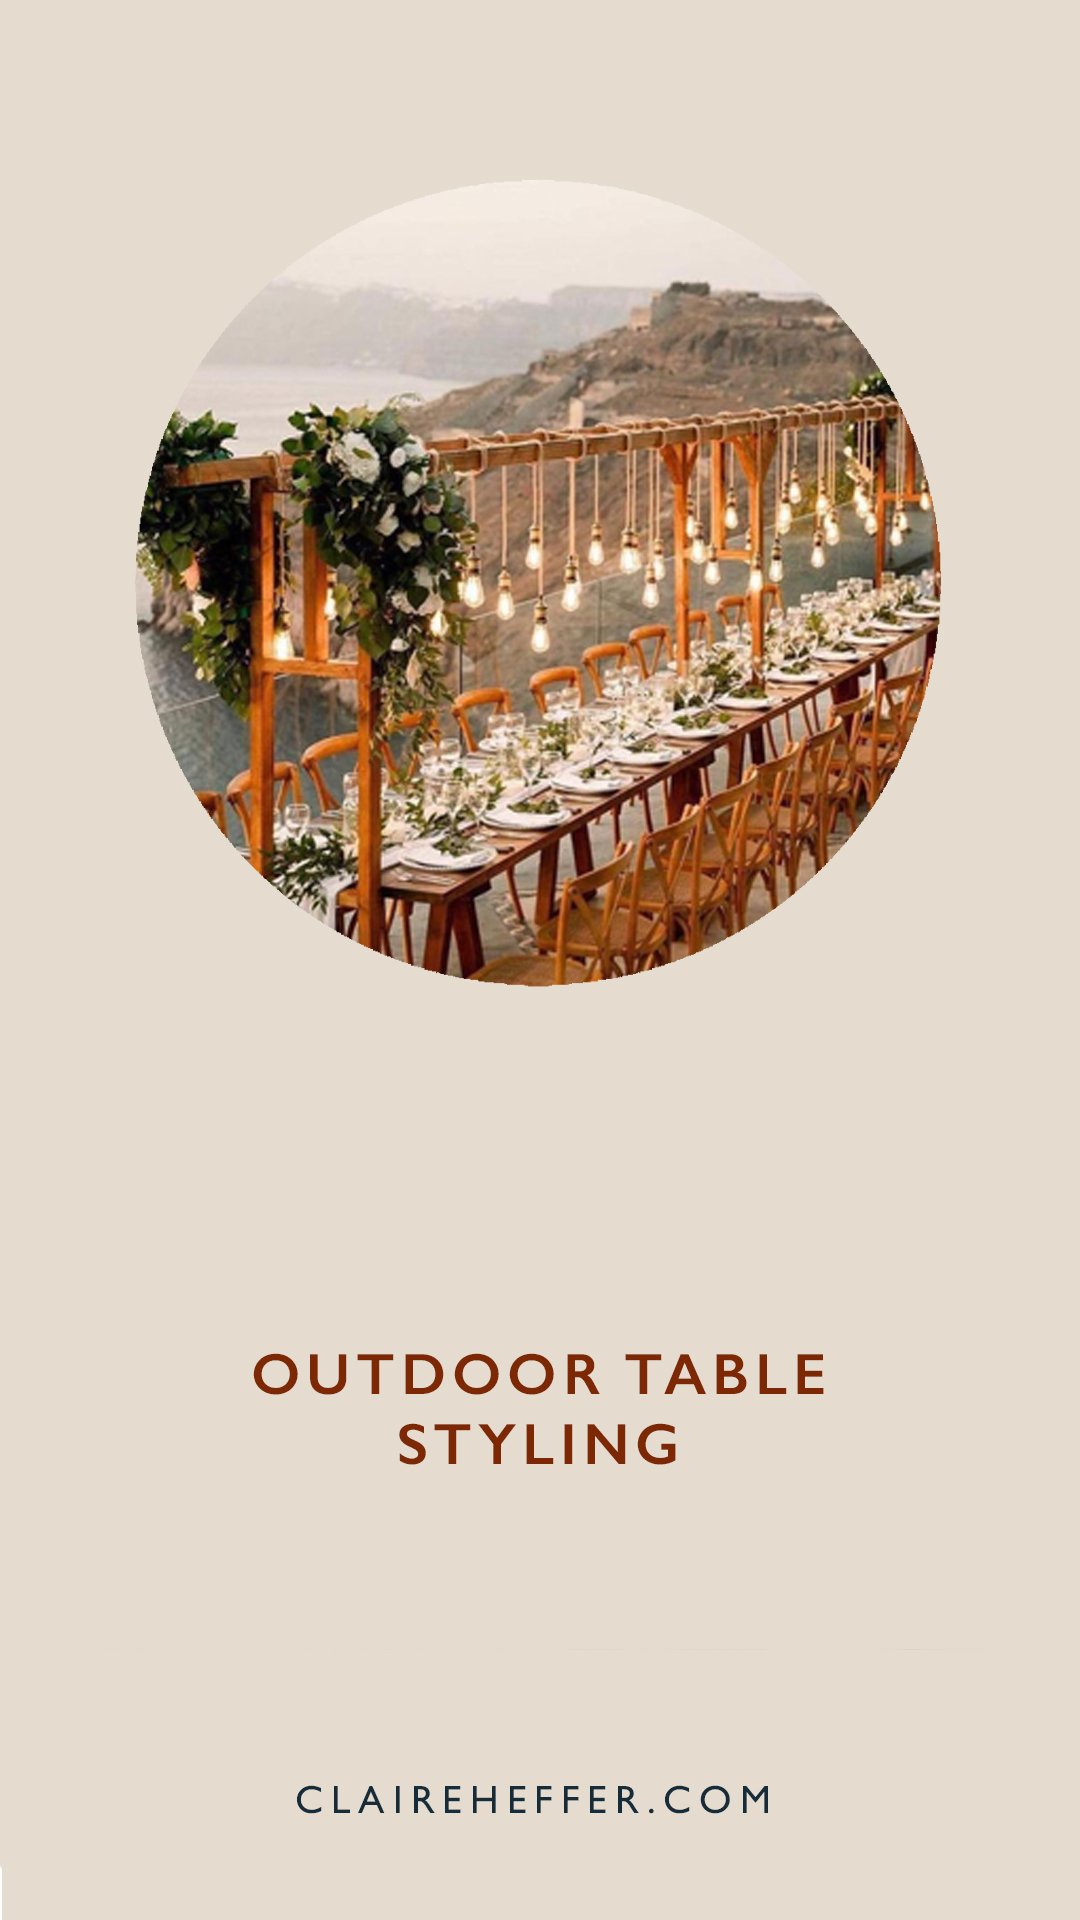 _TABLE STYLING15.jpg